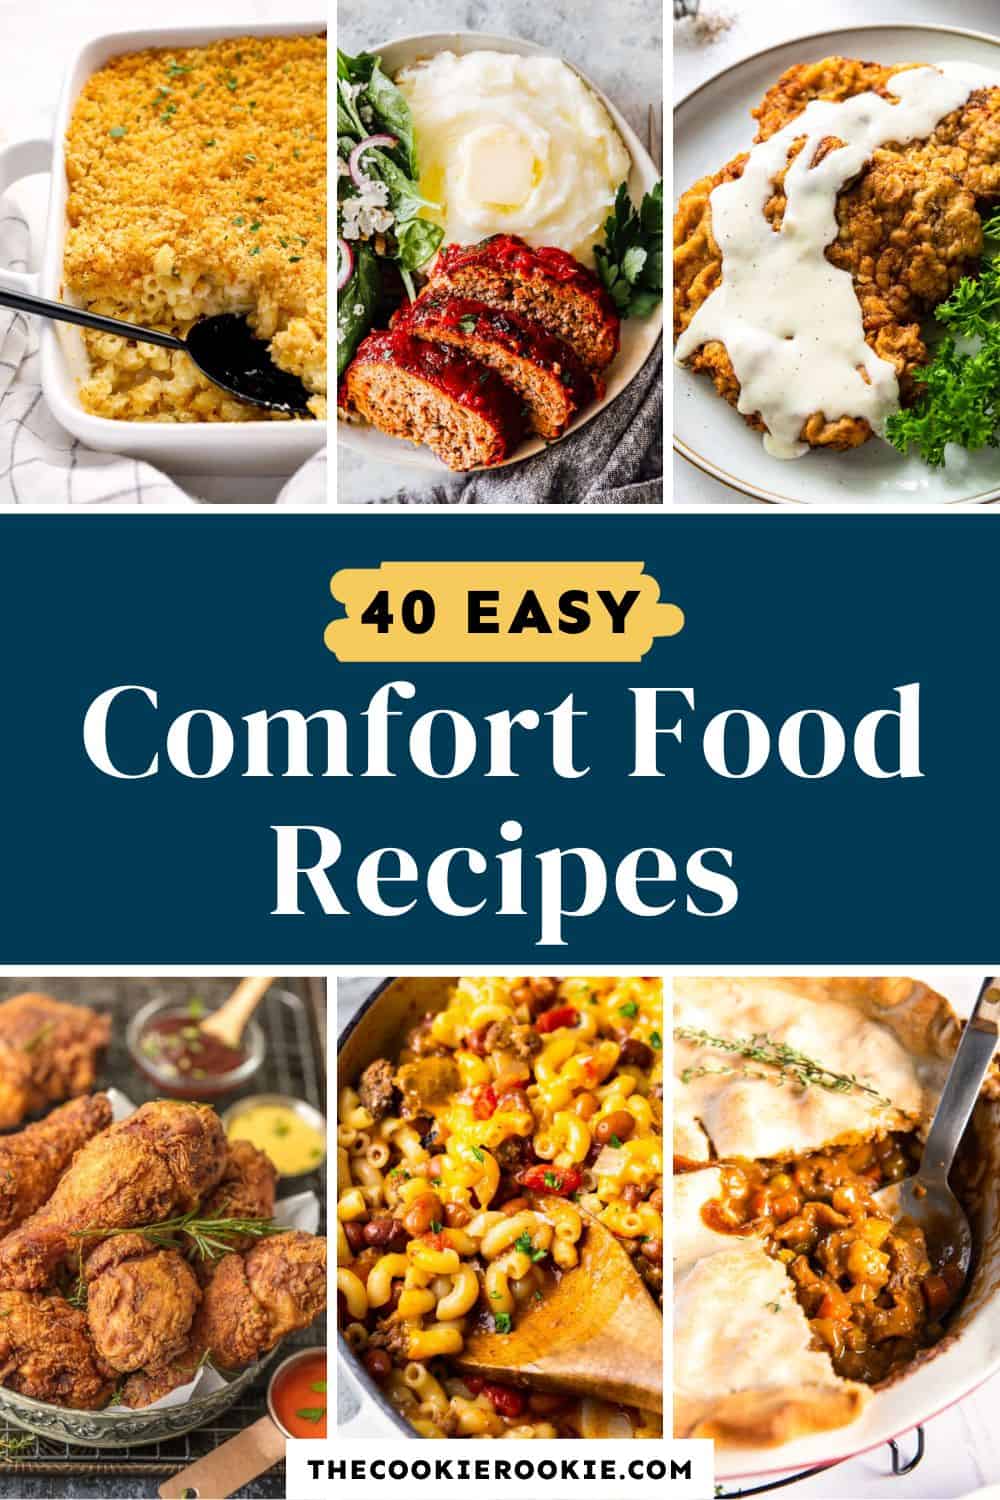 All in One Pot Meals & Dinner Recipes for Every Occasion